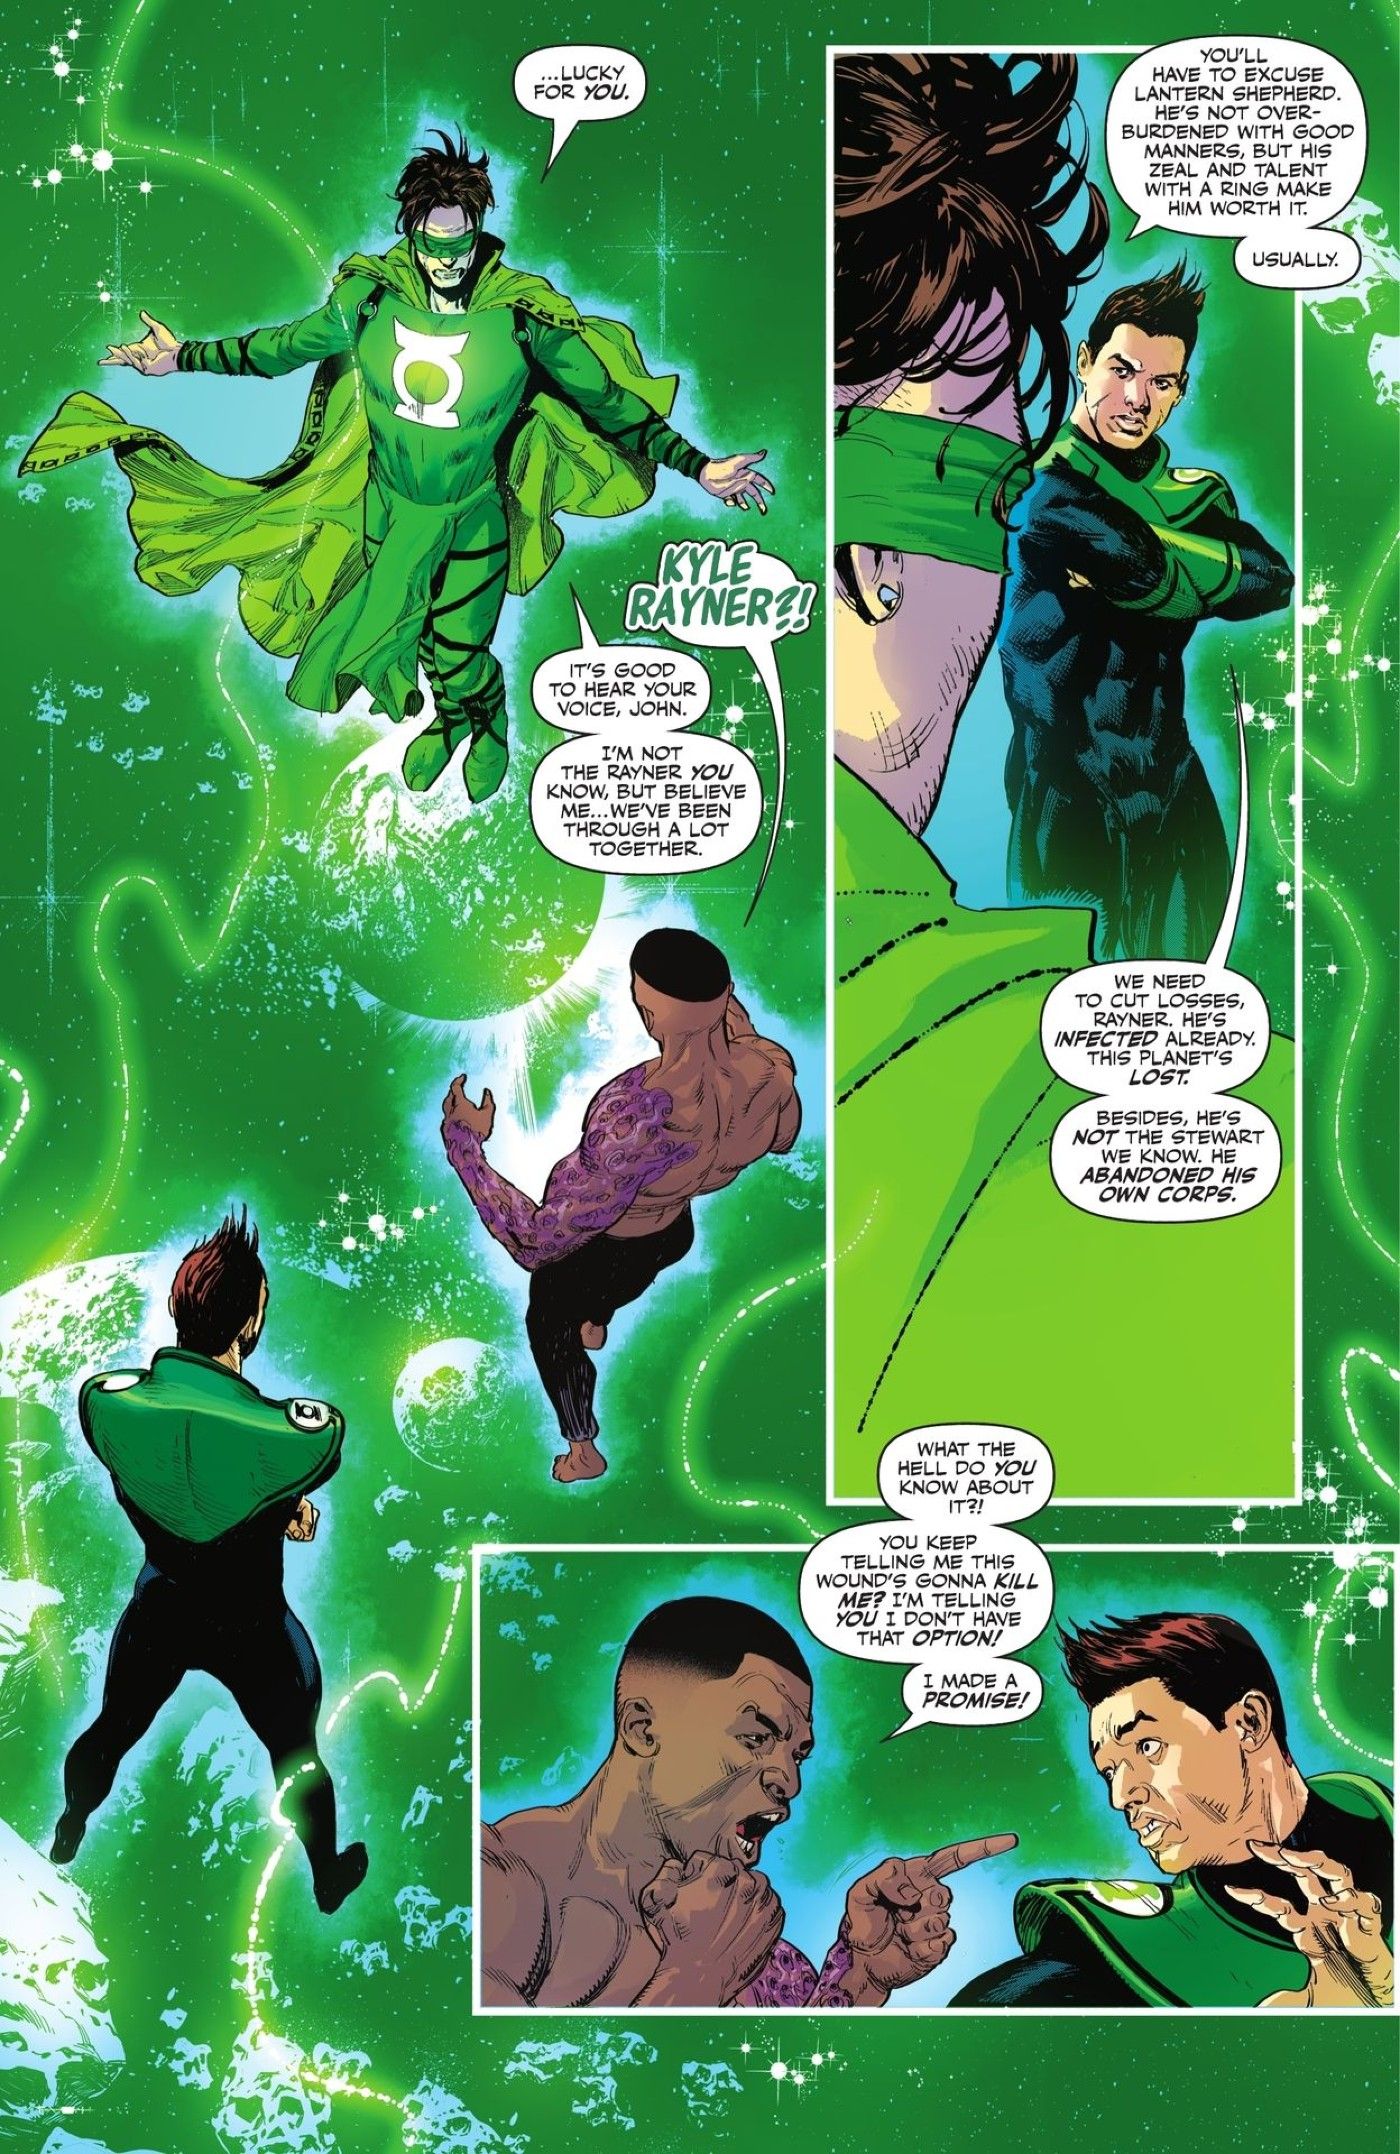 DC Just Set Up Its 90s Green Lantern Kyle Rayner for a Major Comeback